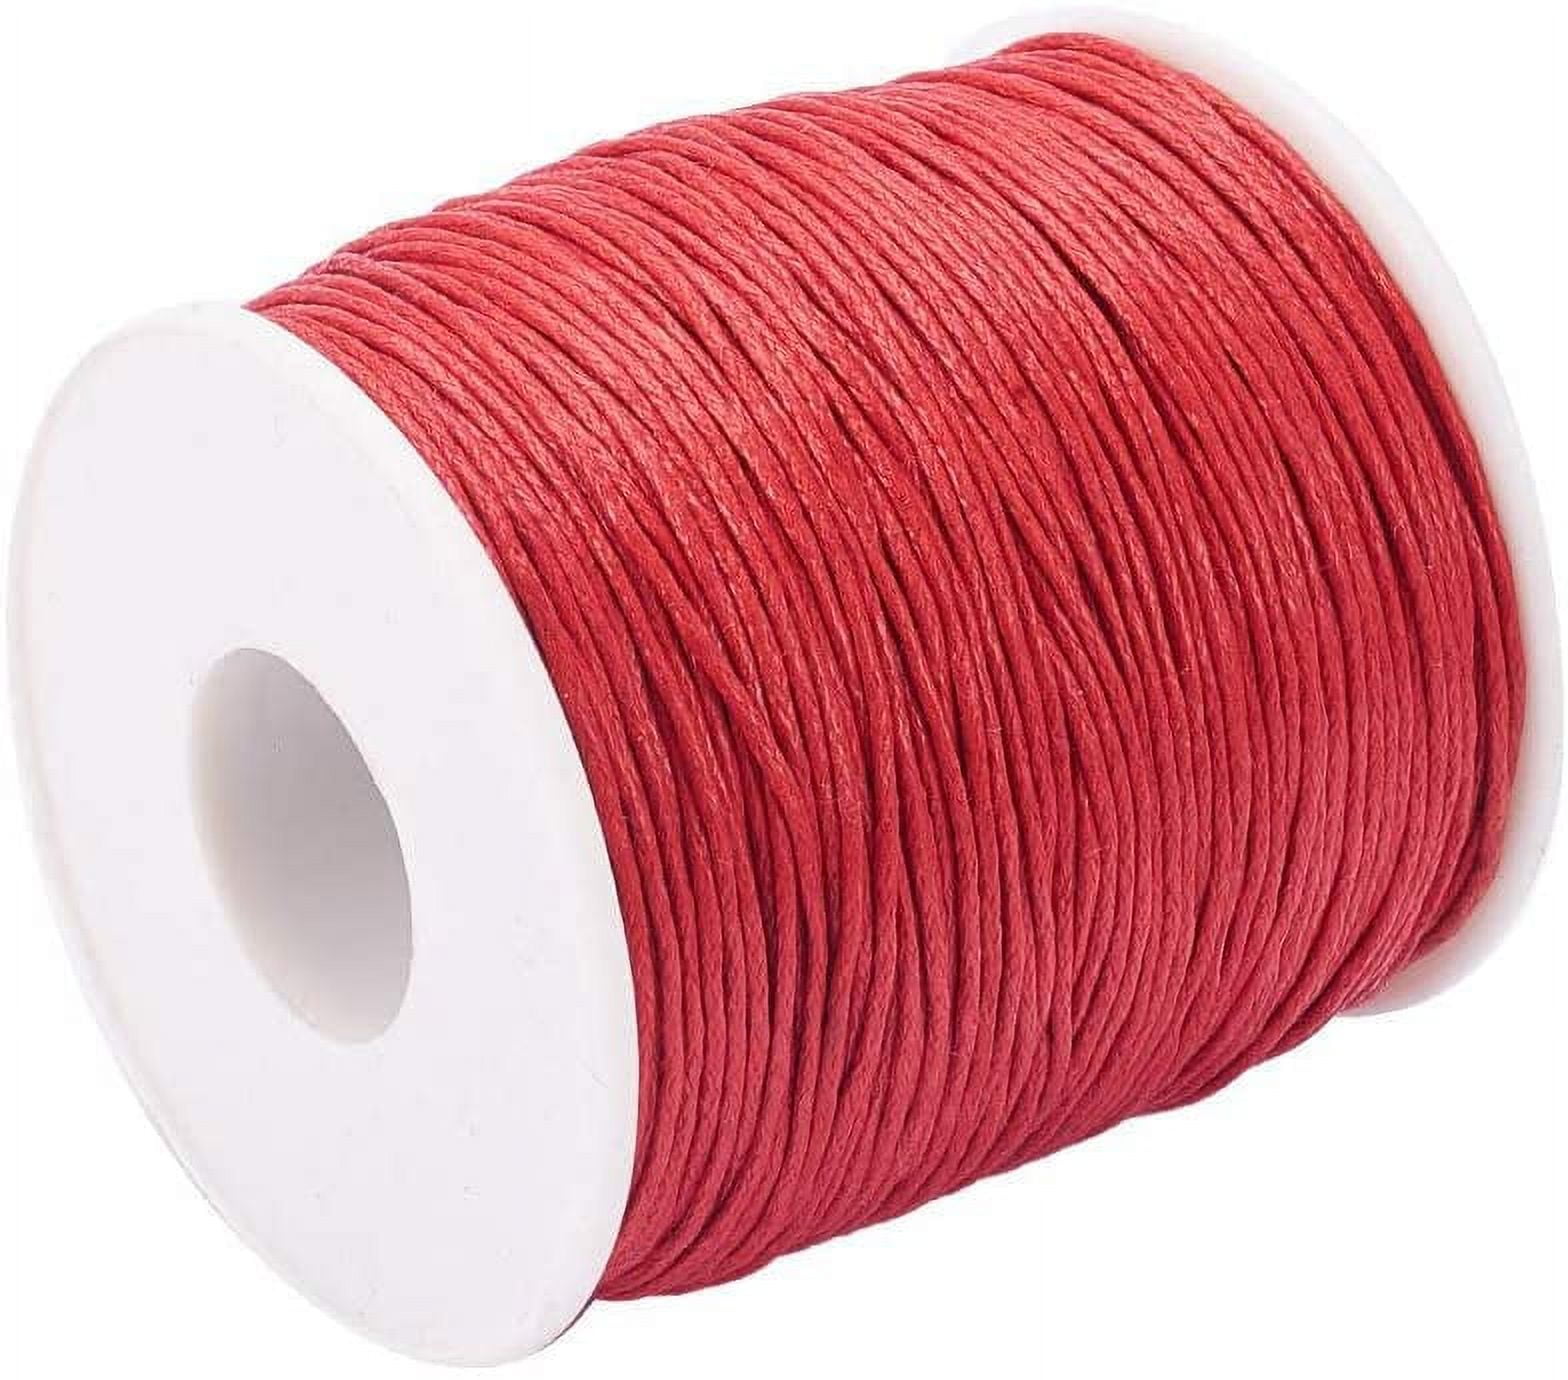  Beadthoven 100Yards 1mm Waxed Cotton Thread for